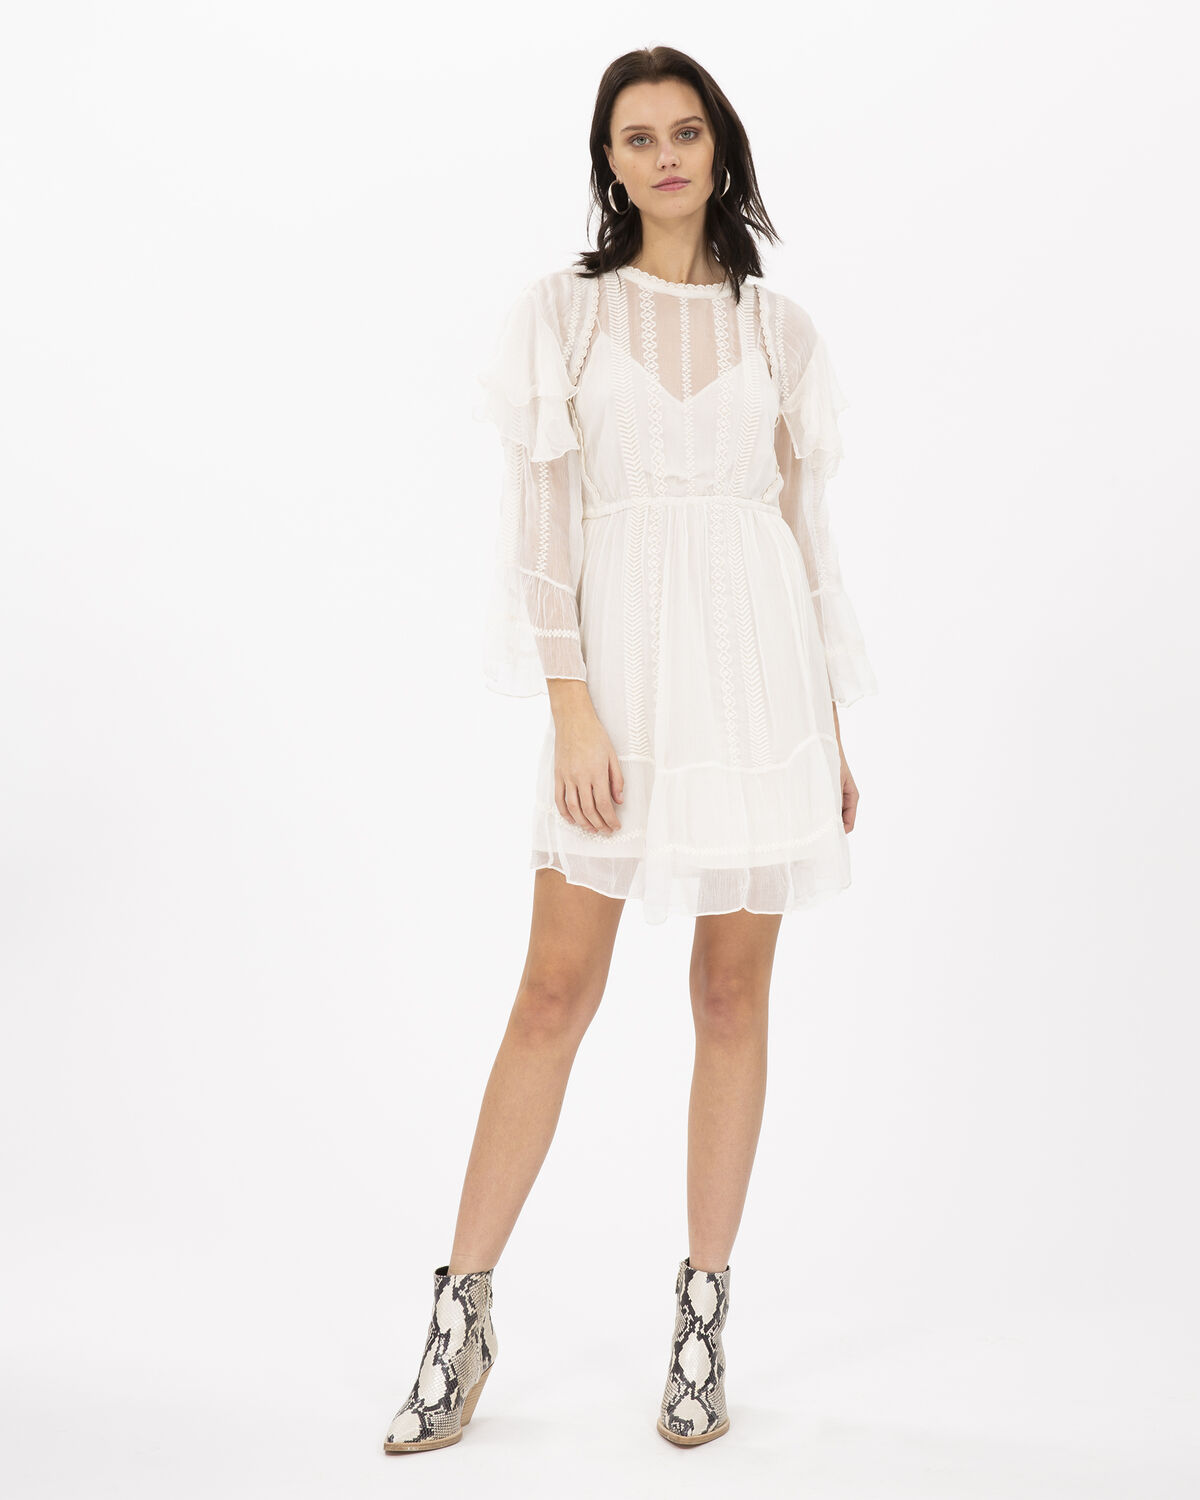 Photo of IRO Paris Western Dress Ecru - This Short Dress With 3/4 Sleeves Is Distinguished By Its Transparency And Multiple Flounces. With Its Delicate Embroidery, It Is The Ideal Piece For A Glam-rock Look. Dresses